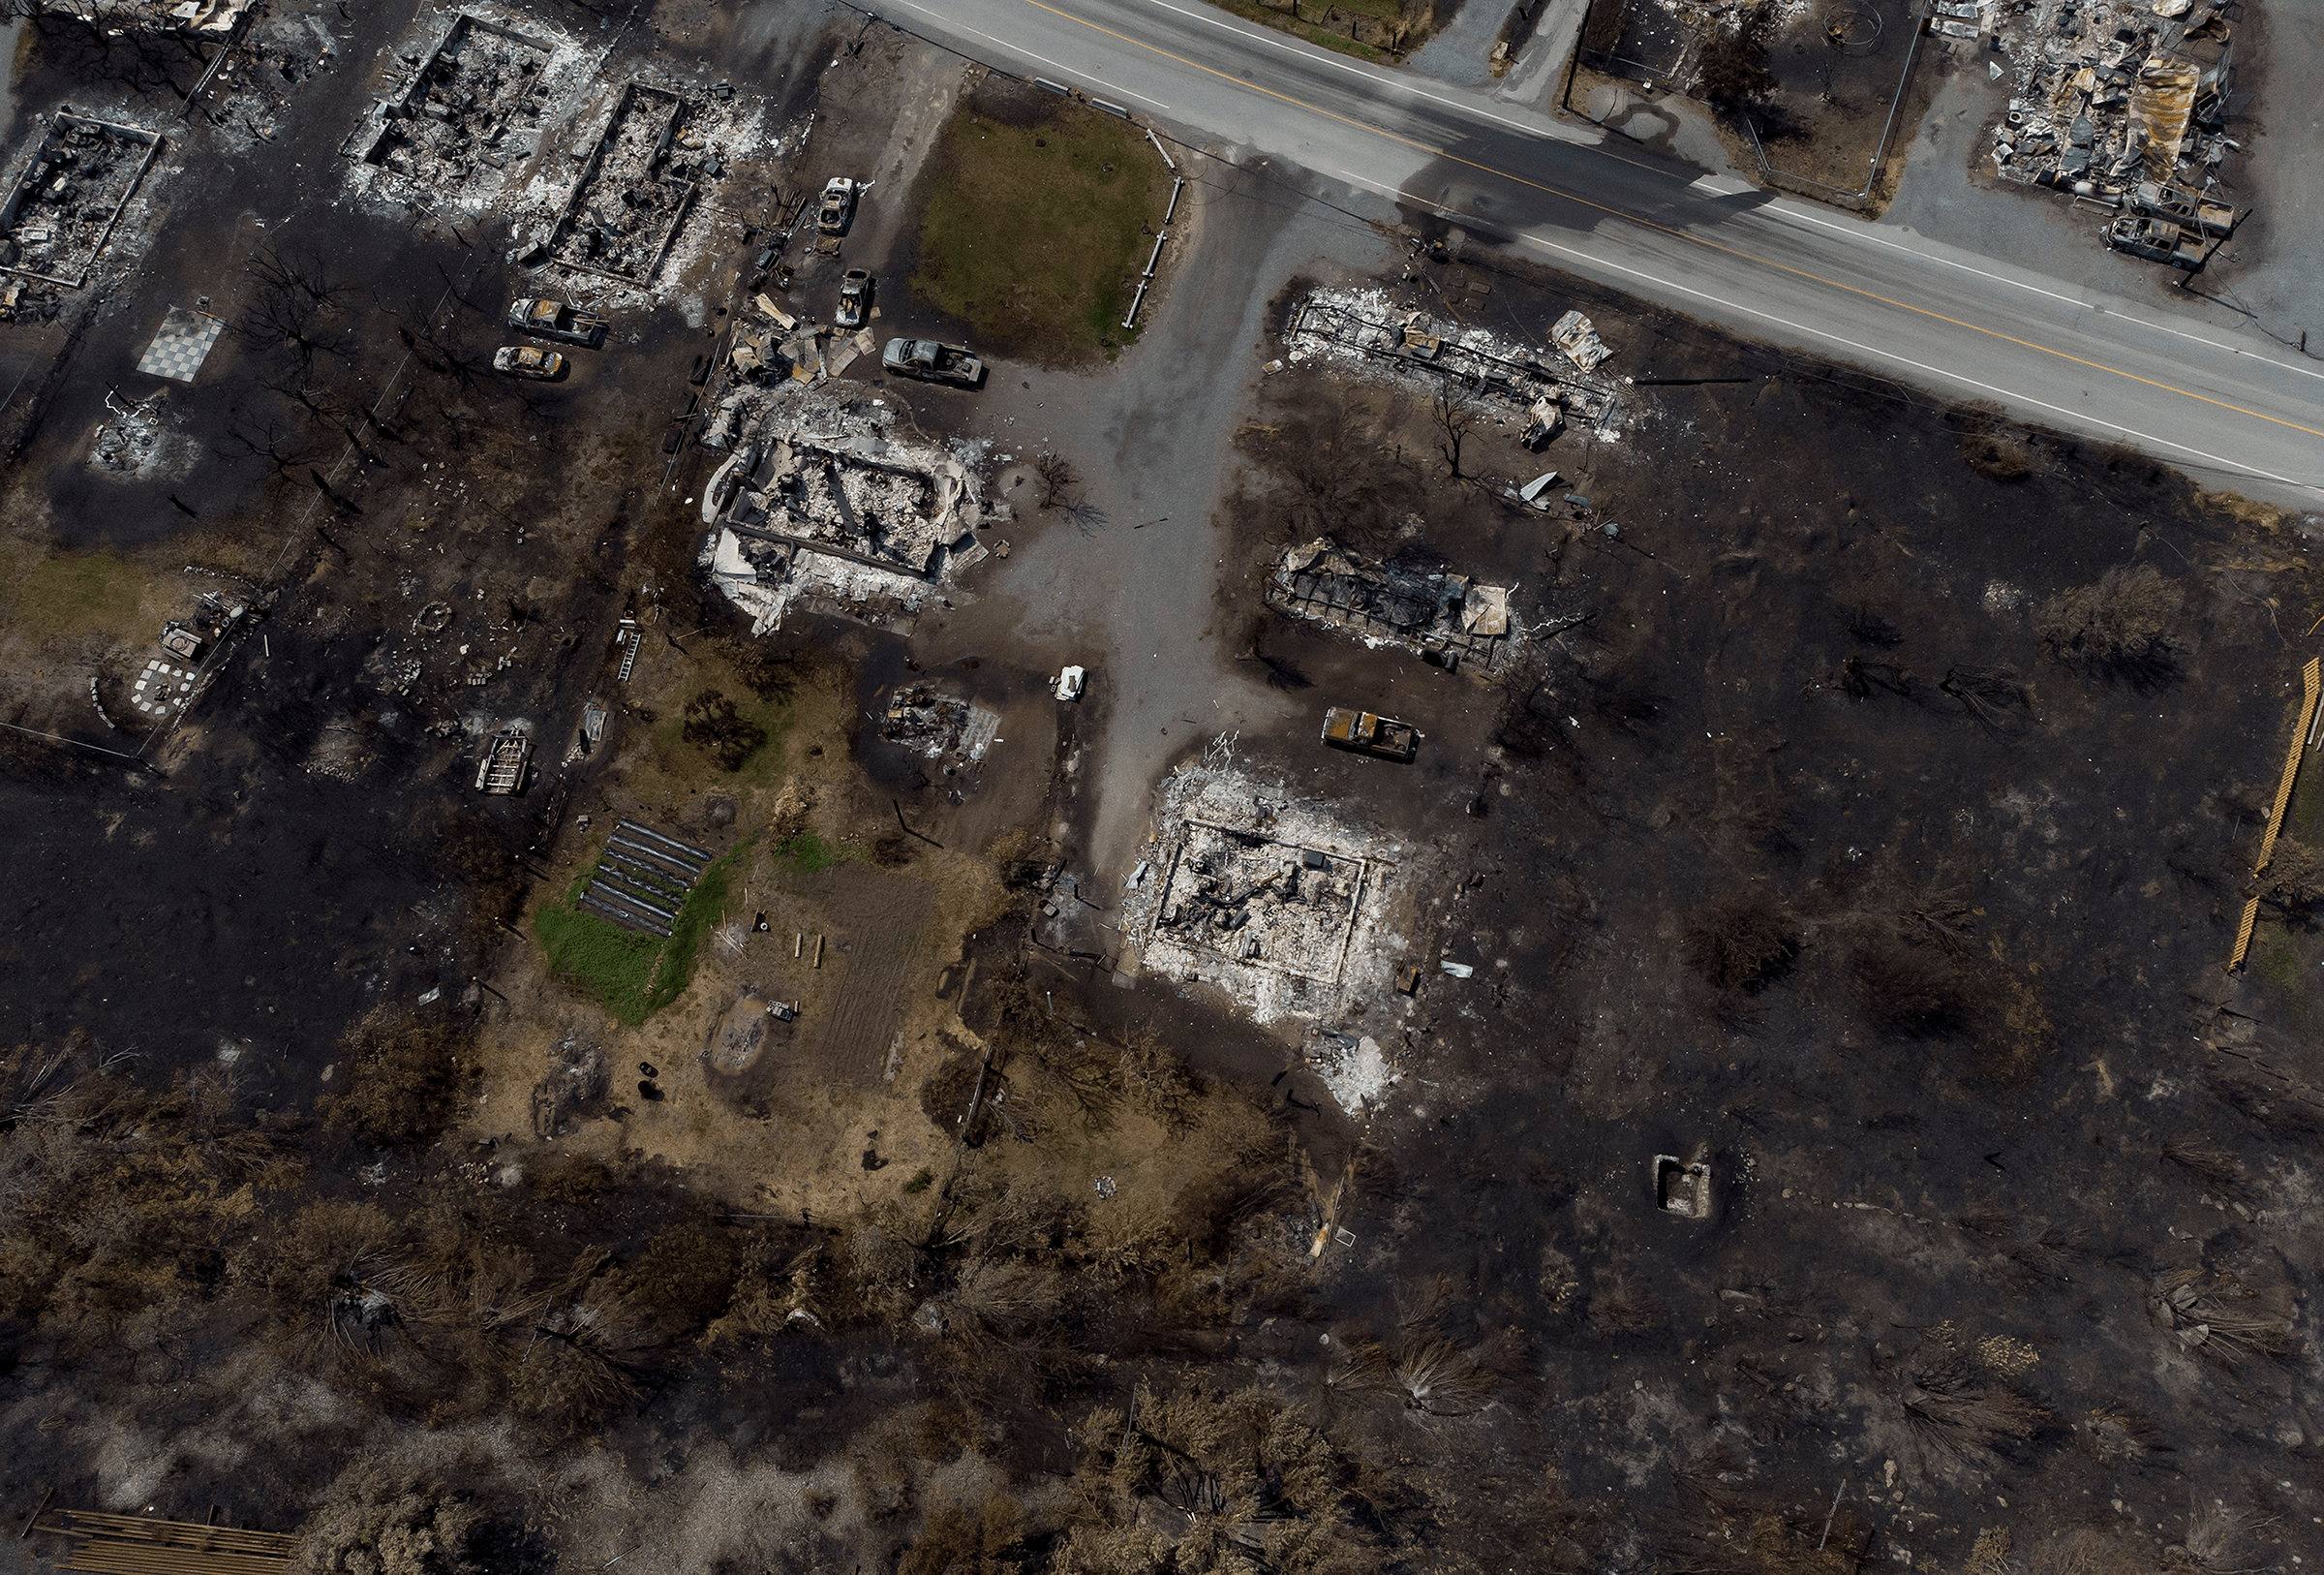 Damaged structures are seen in Lytton, British Columbia, on July 9, 2021, after a wildfire destroyed most of the village on June 30.